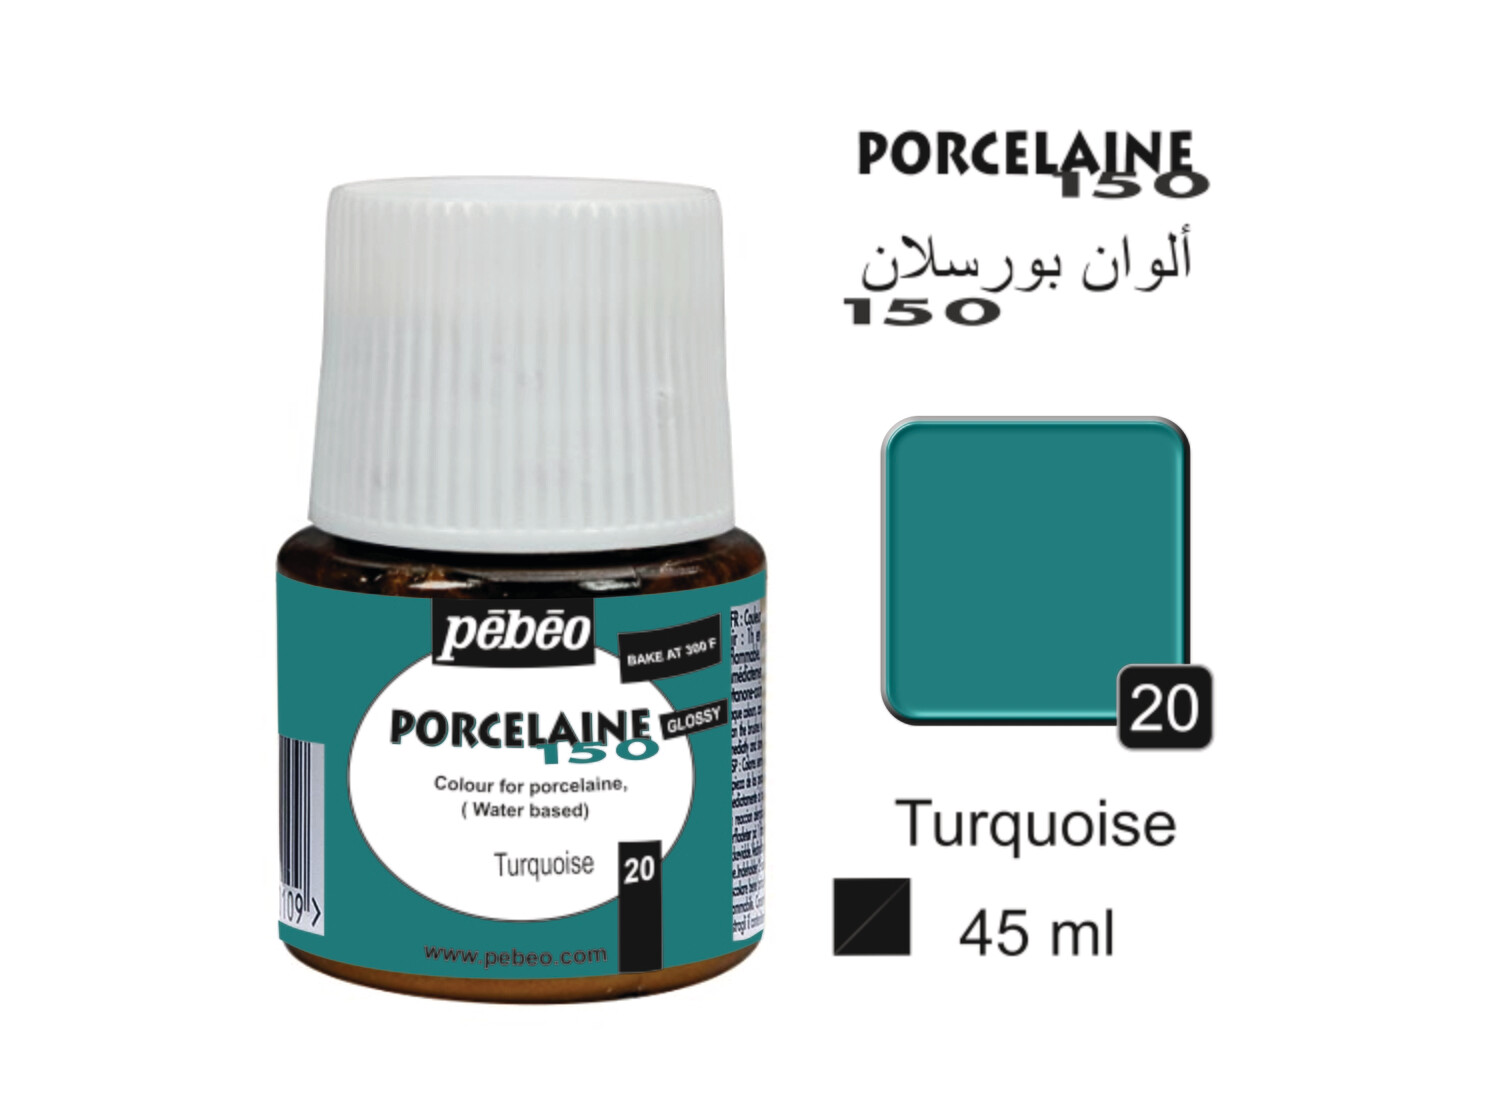 PORCELAINE 150, GLOSS 45 ml, Turquoise No. 20